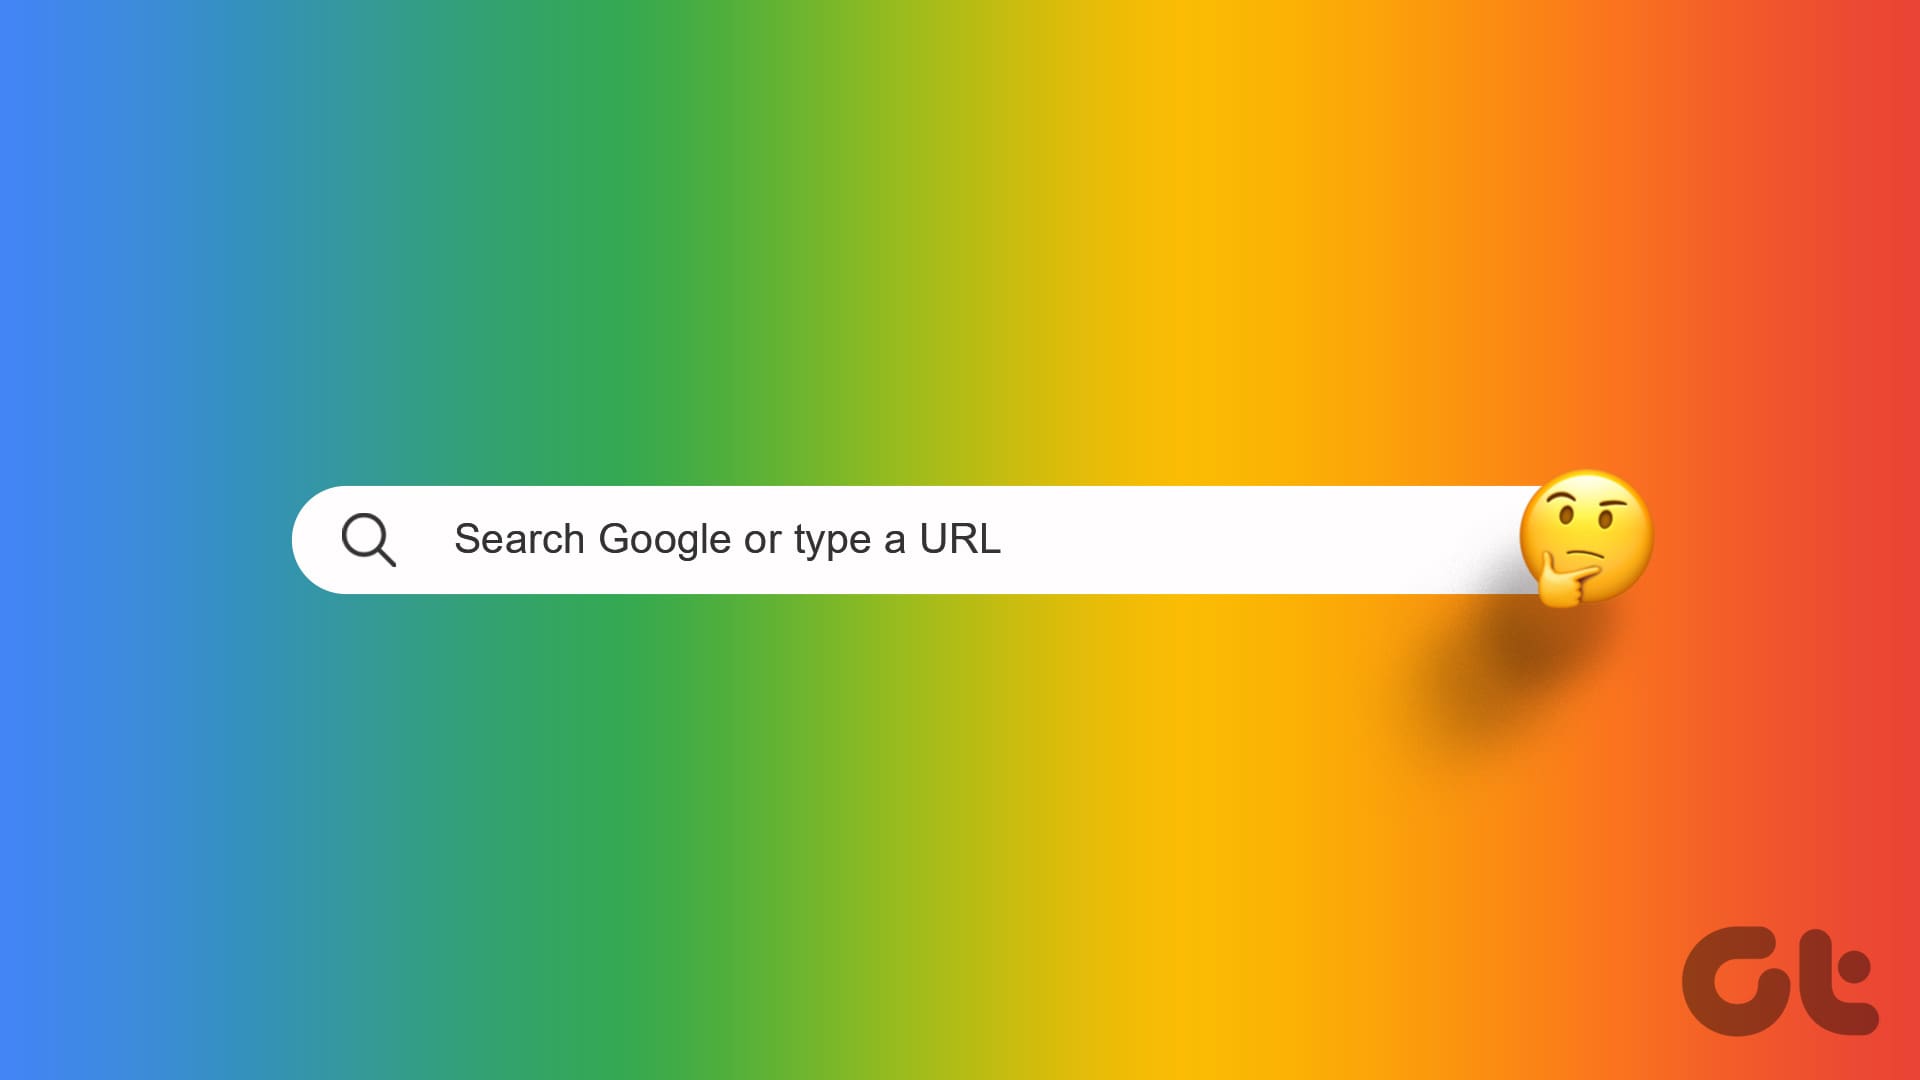 What Is Search Google or Type a URL